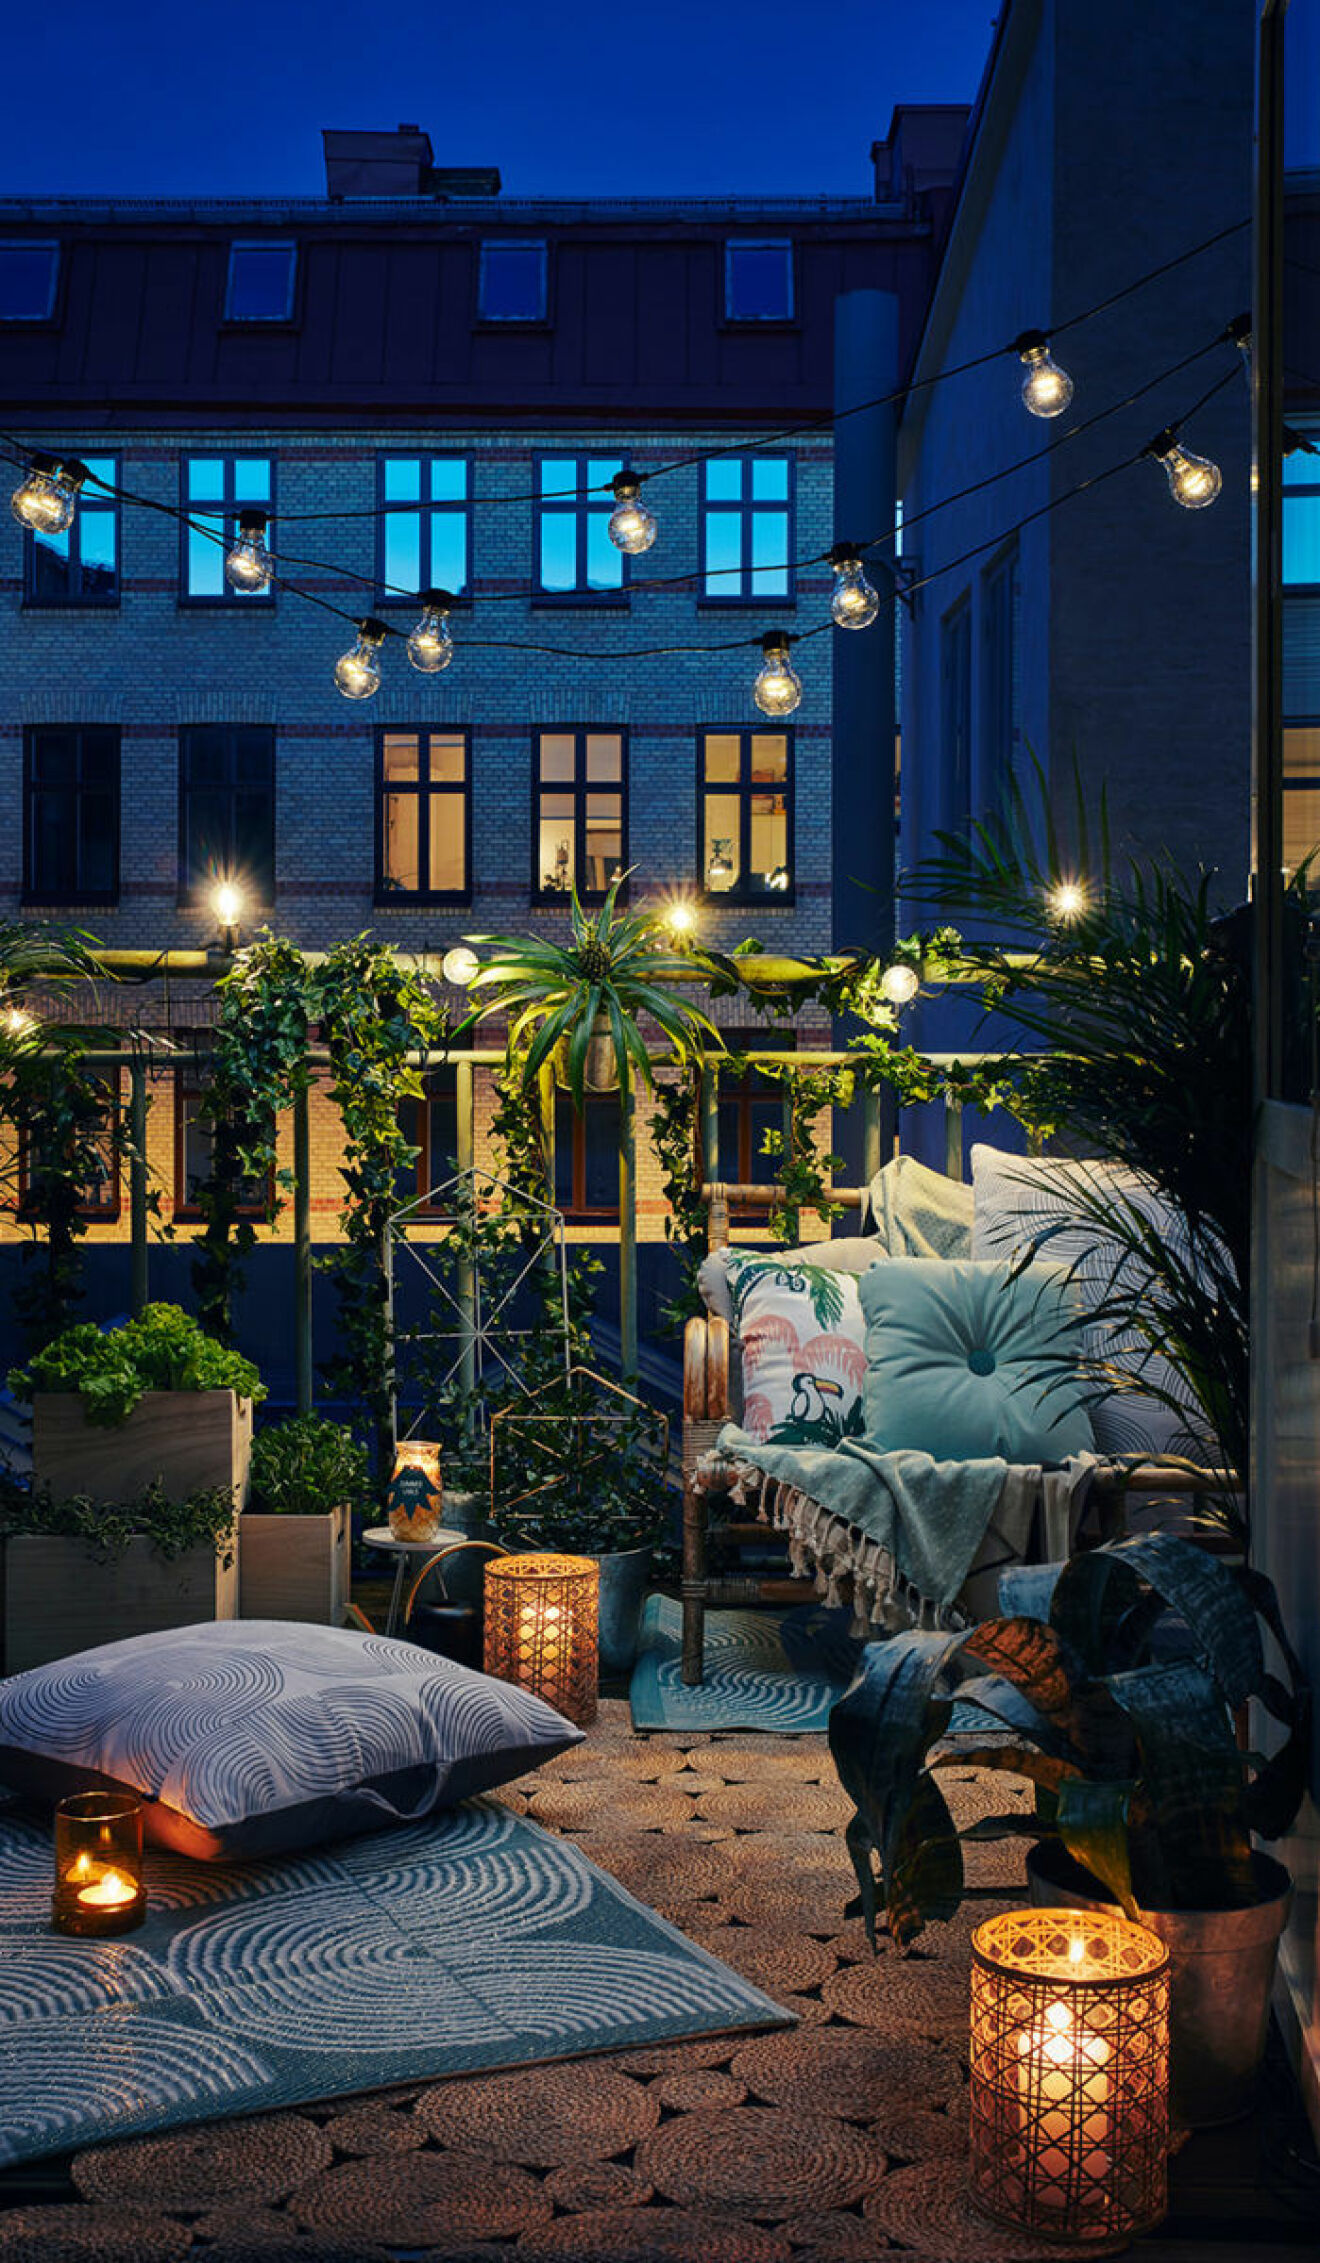 Scandinavian balcony by night, lit with stringlights and candles.